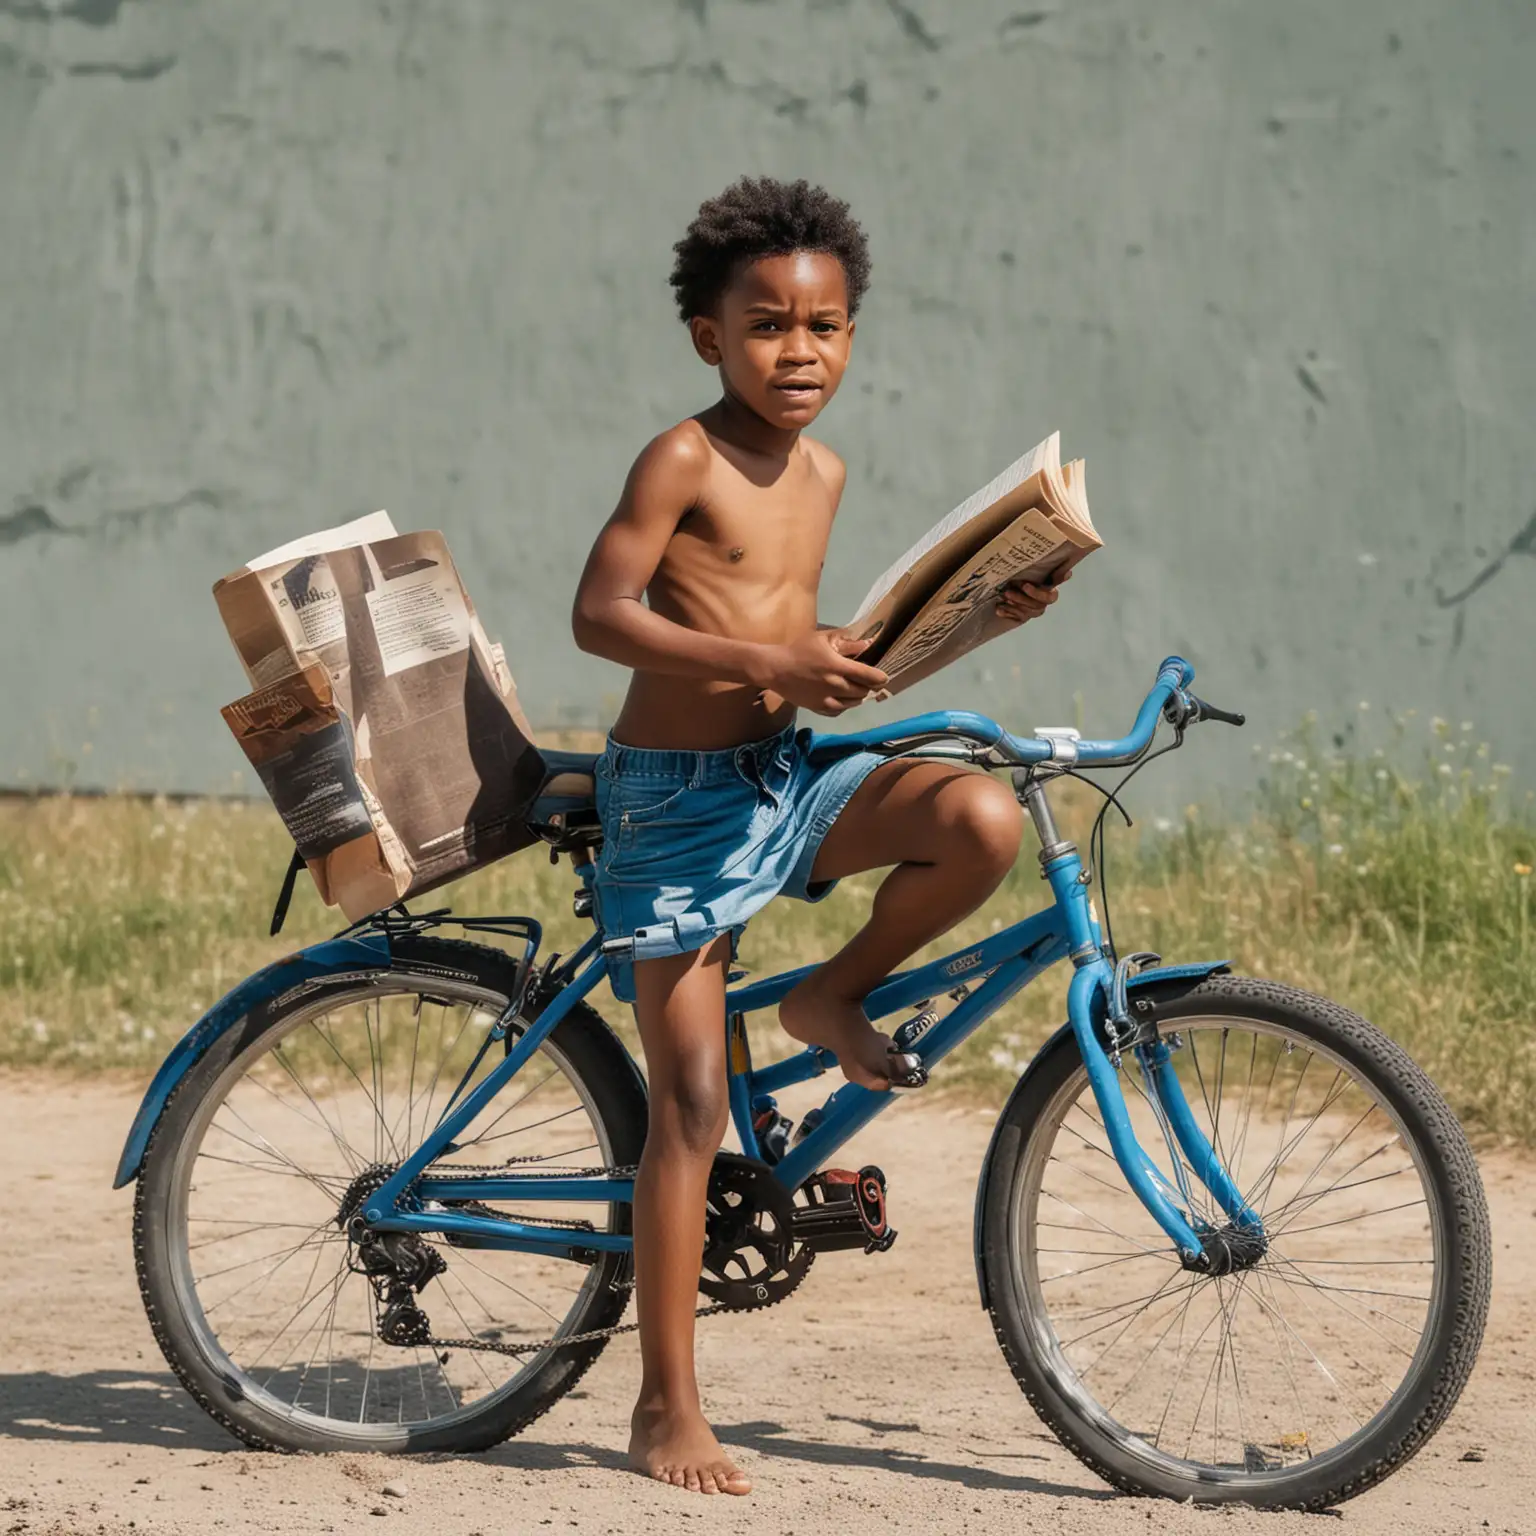 Angry-Shirtless-Black-Boy-Riding-Bicycle-with-Book